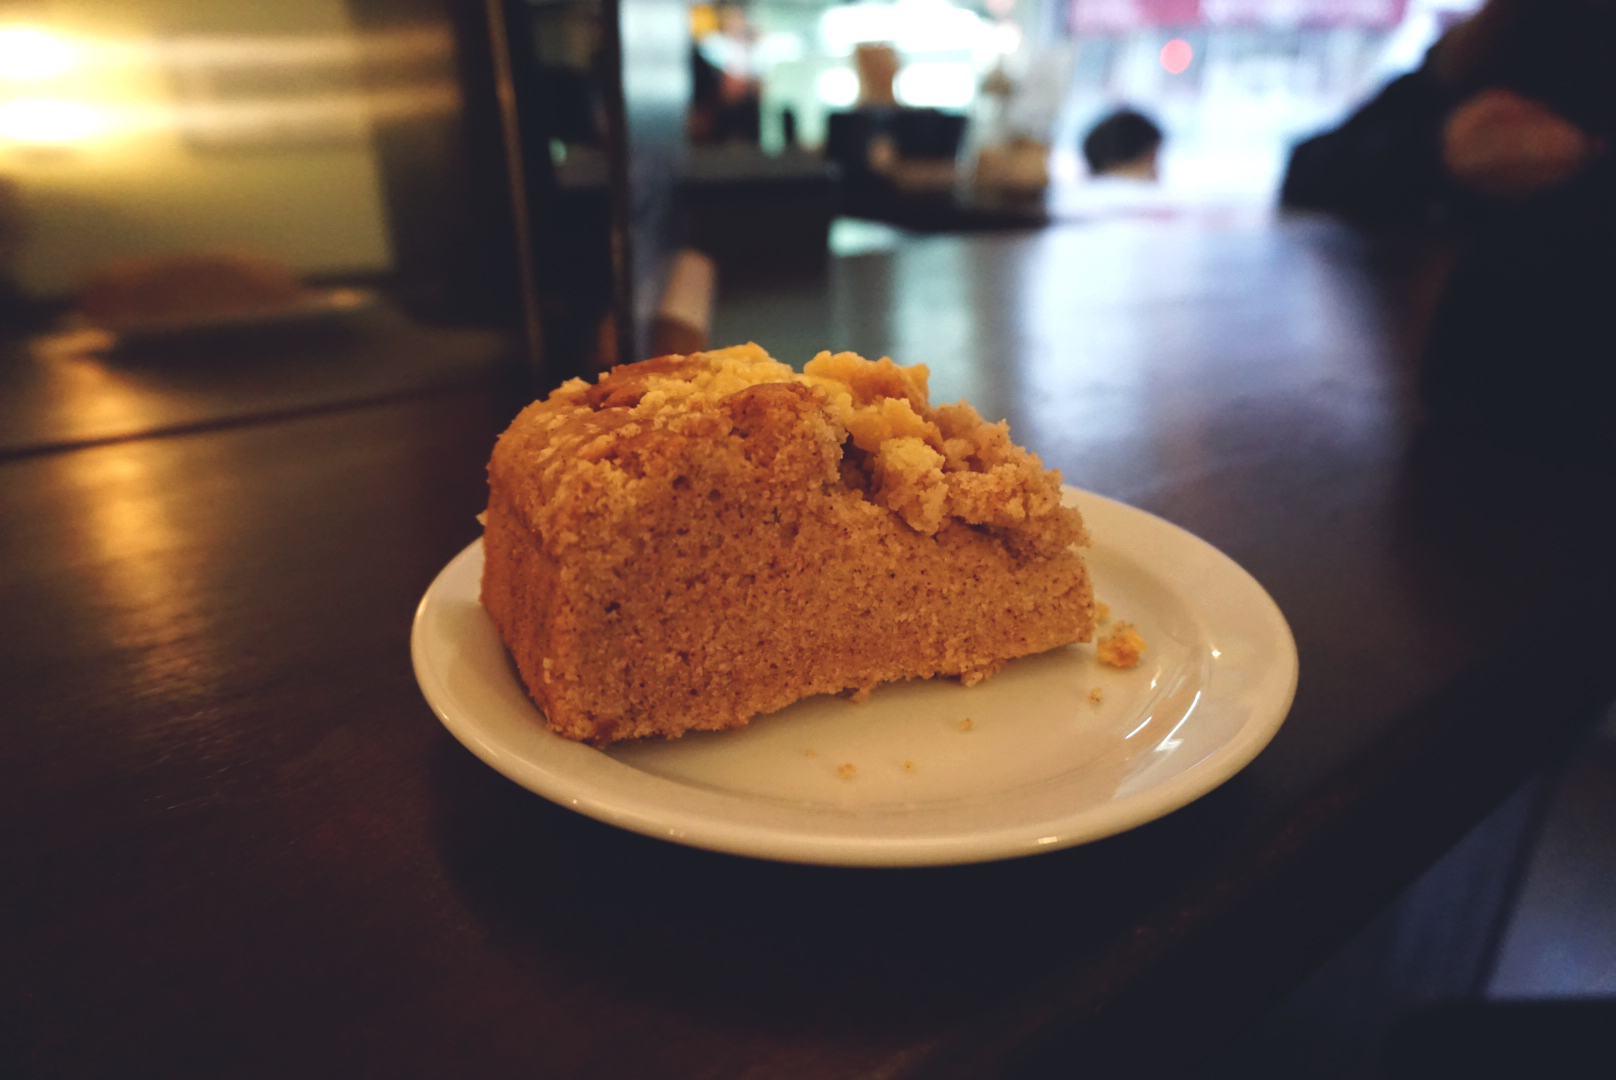 Apple and cinnamon cake from Cookies and Scream on Holloway Road - Cookies and Scream Holloway